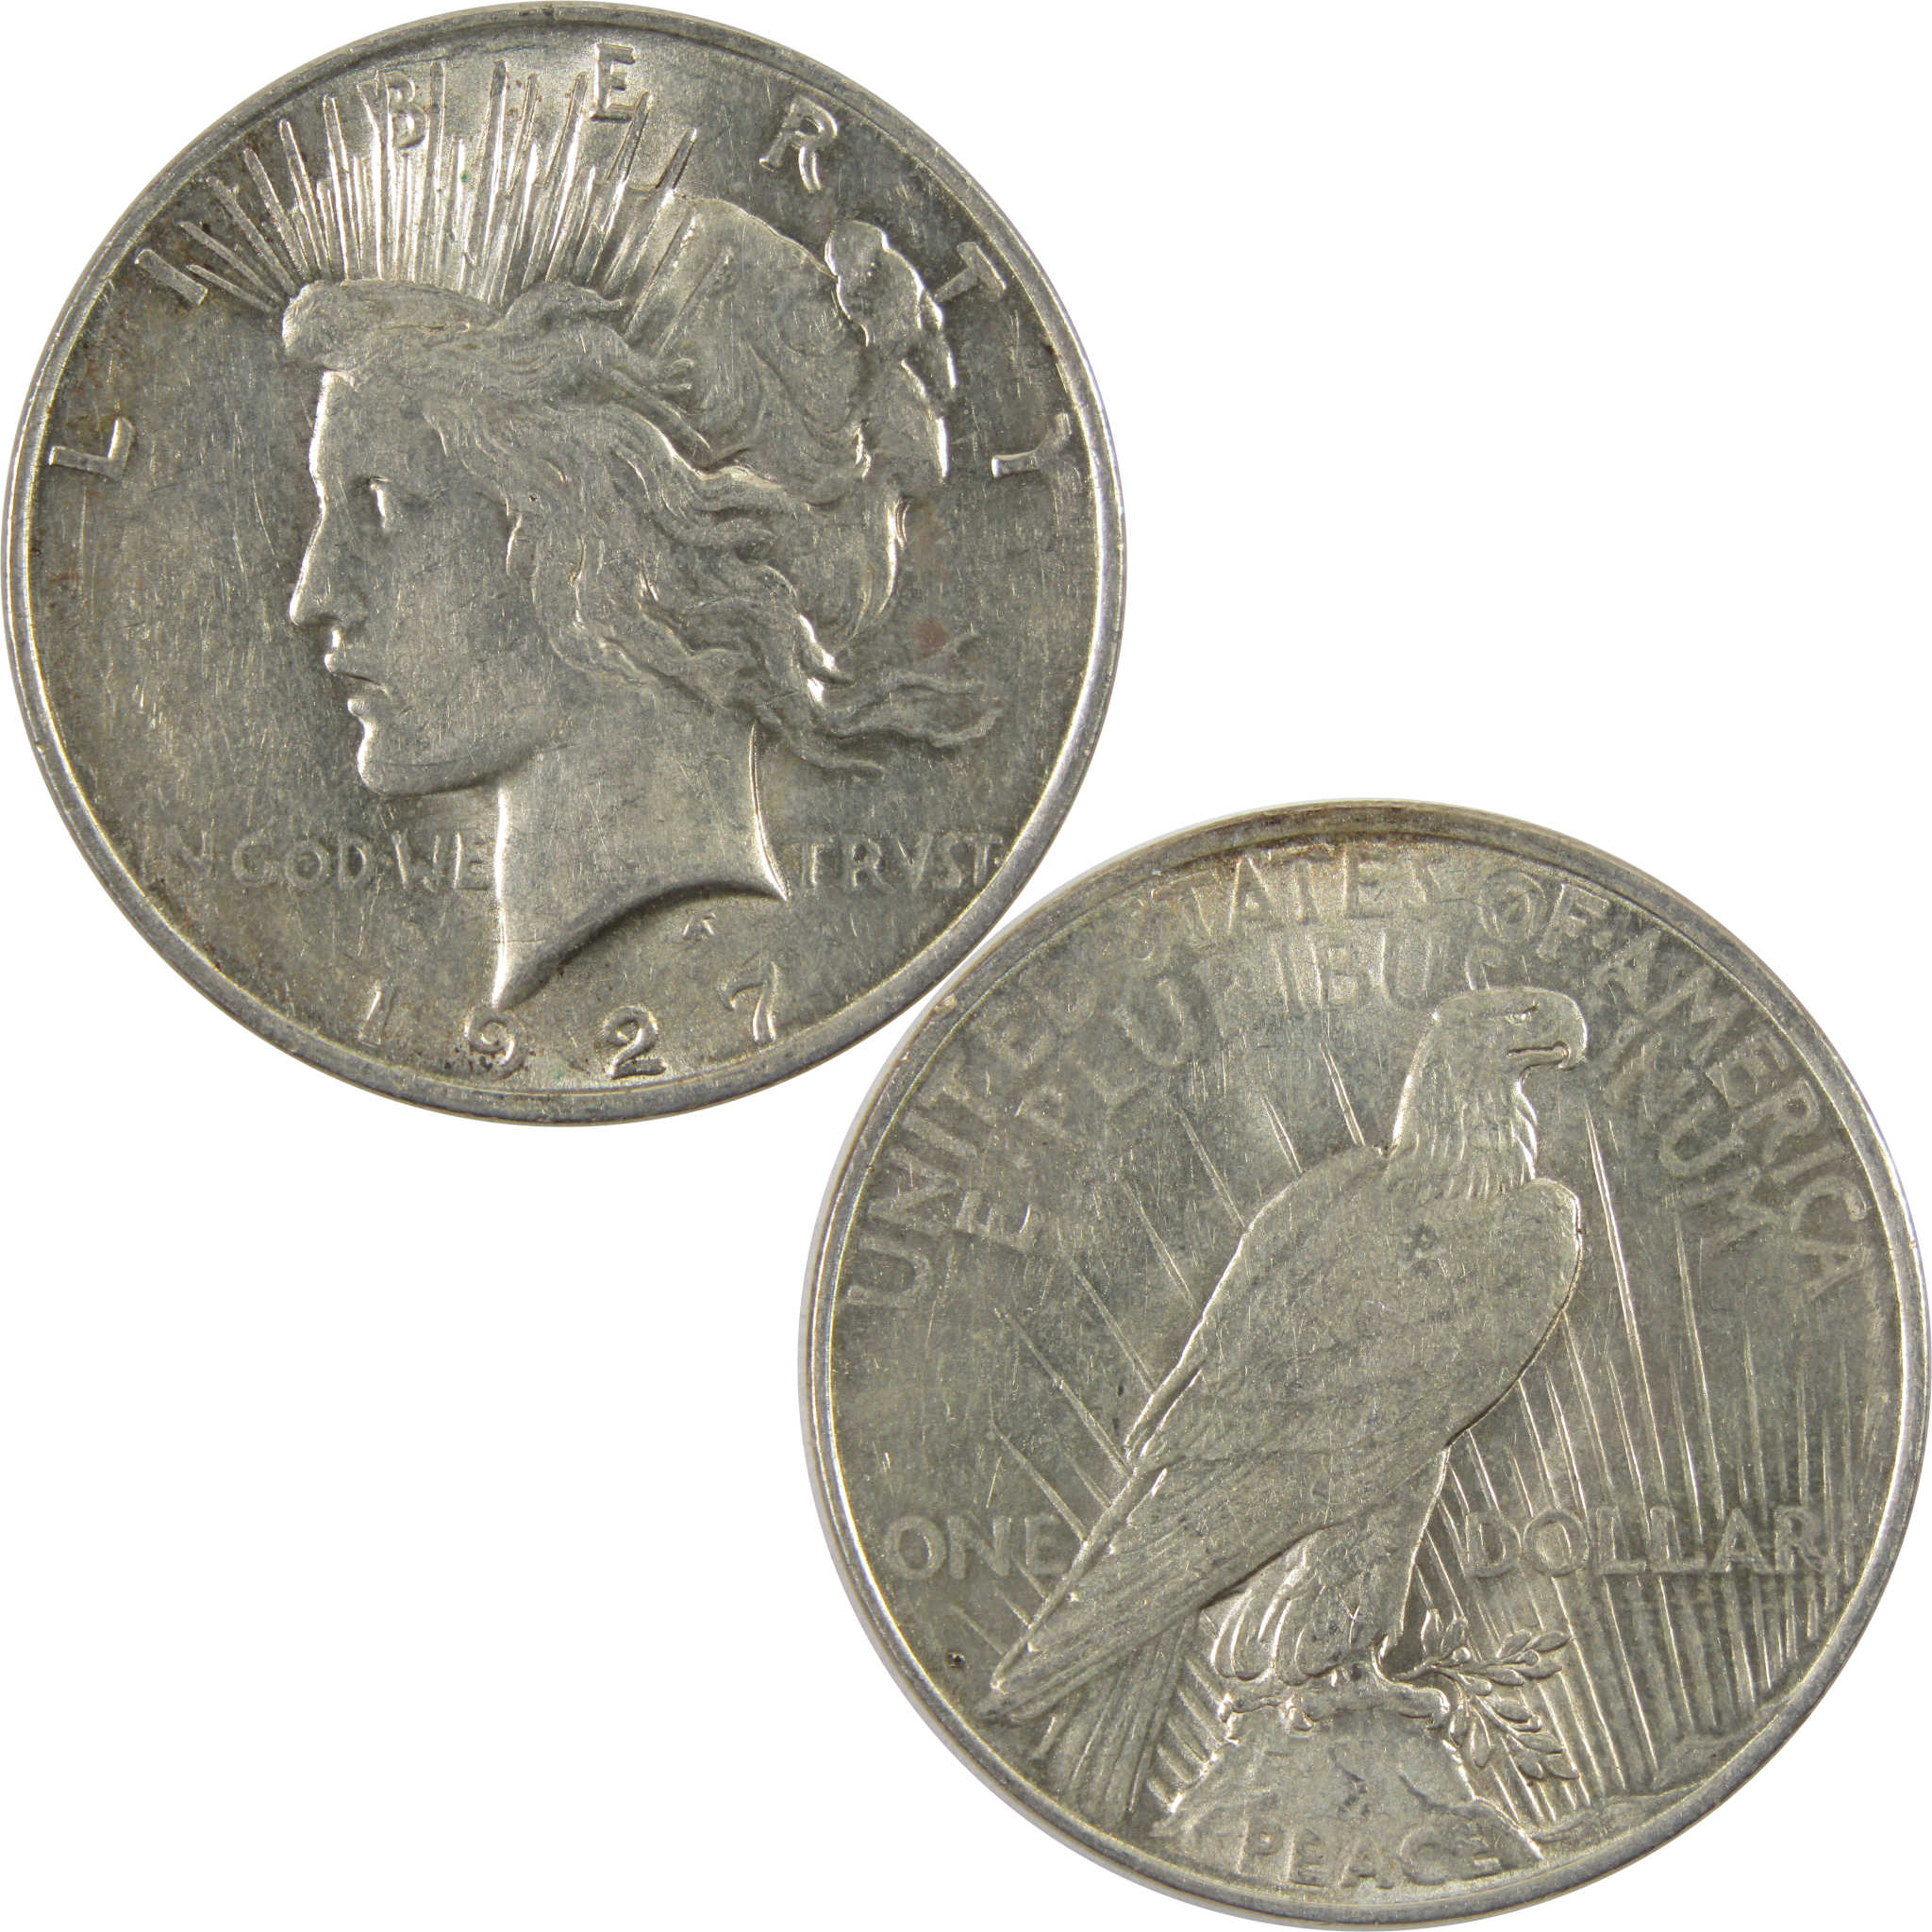 1927 D Peace Dollar AU About Uncirculated 90% Silver $1 Coin SKU:I7710